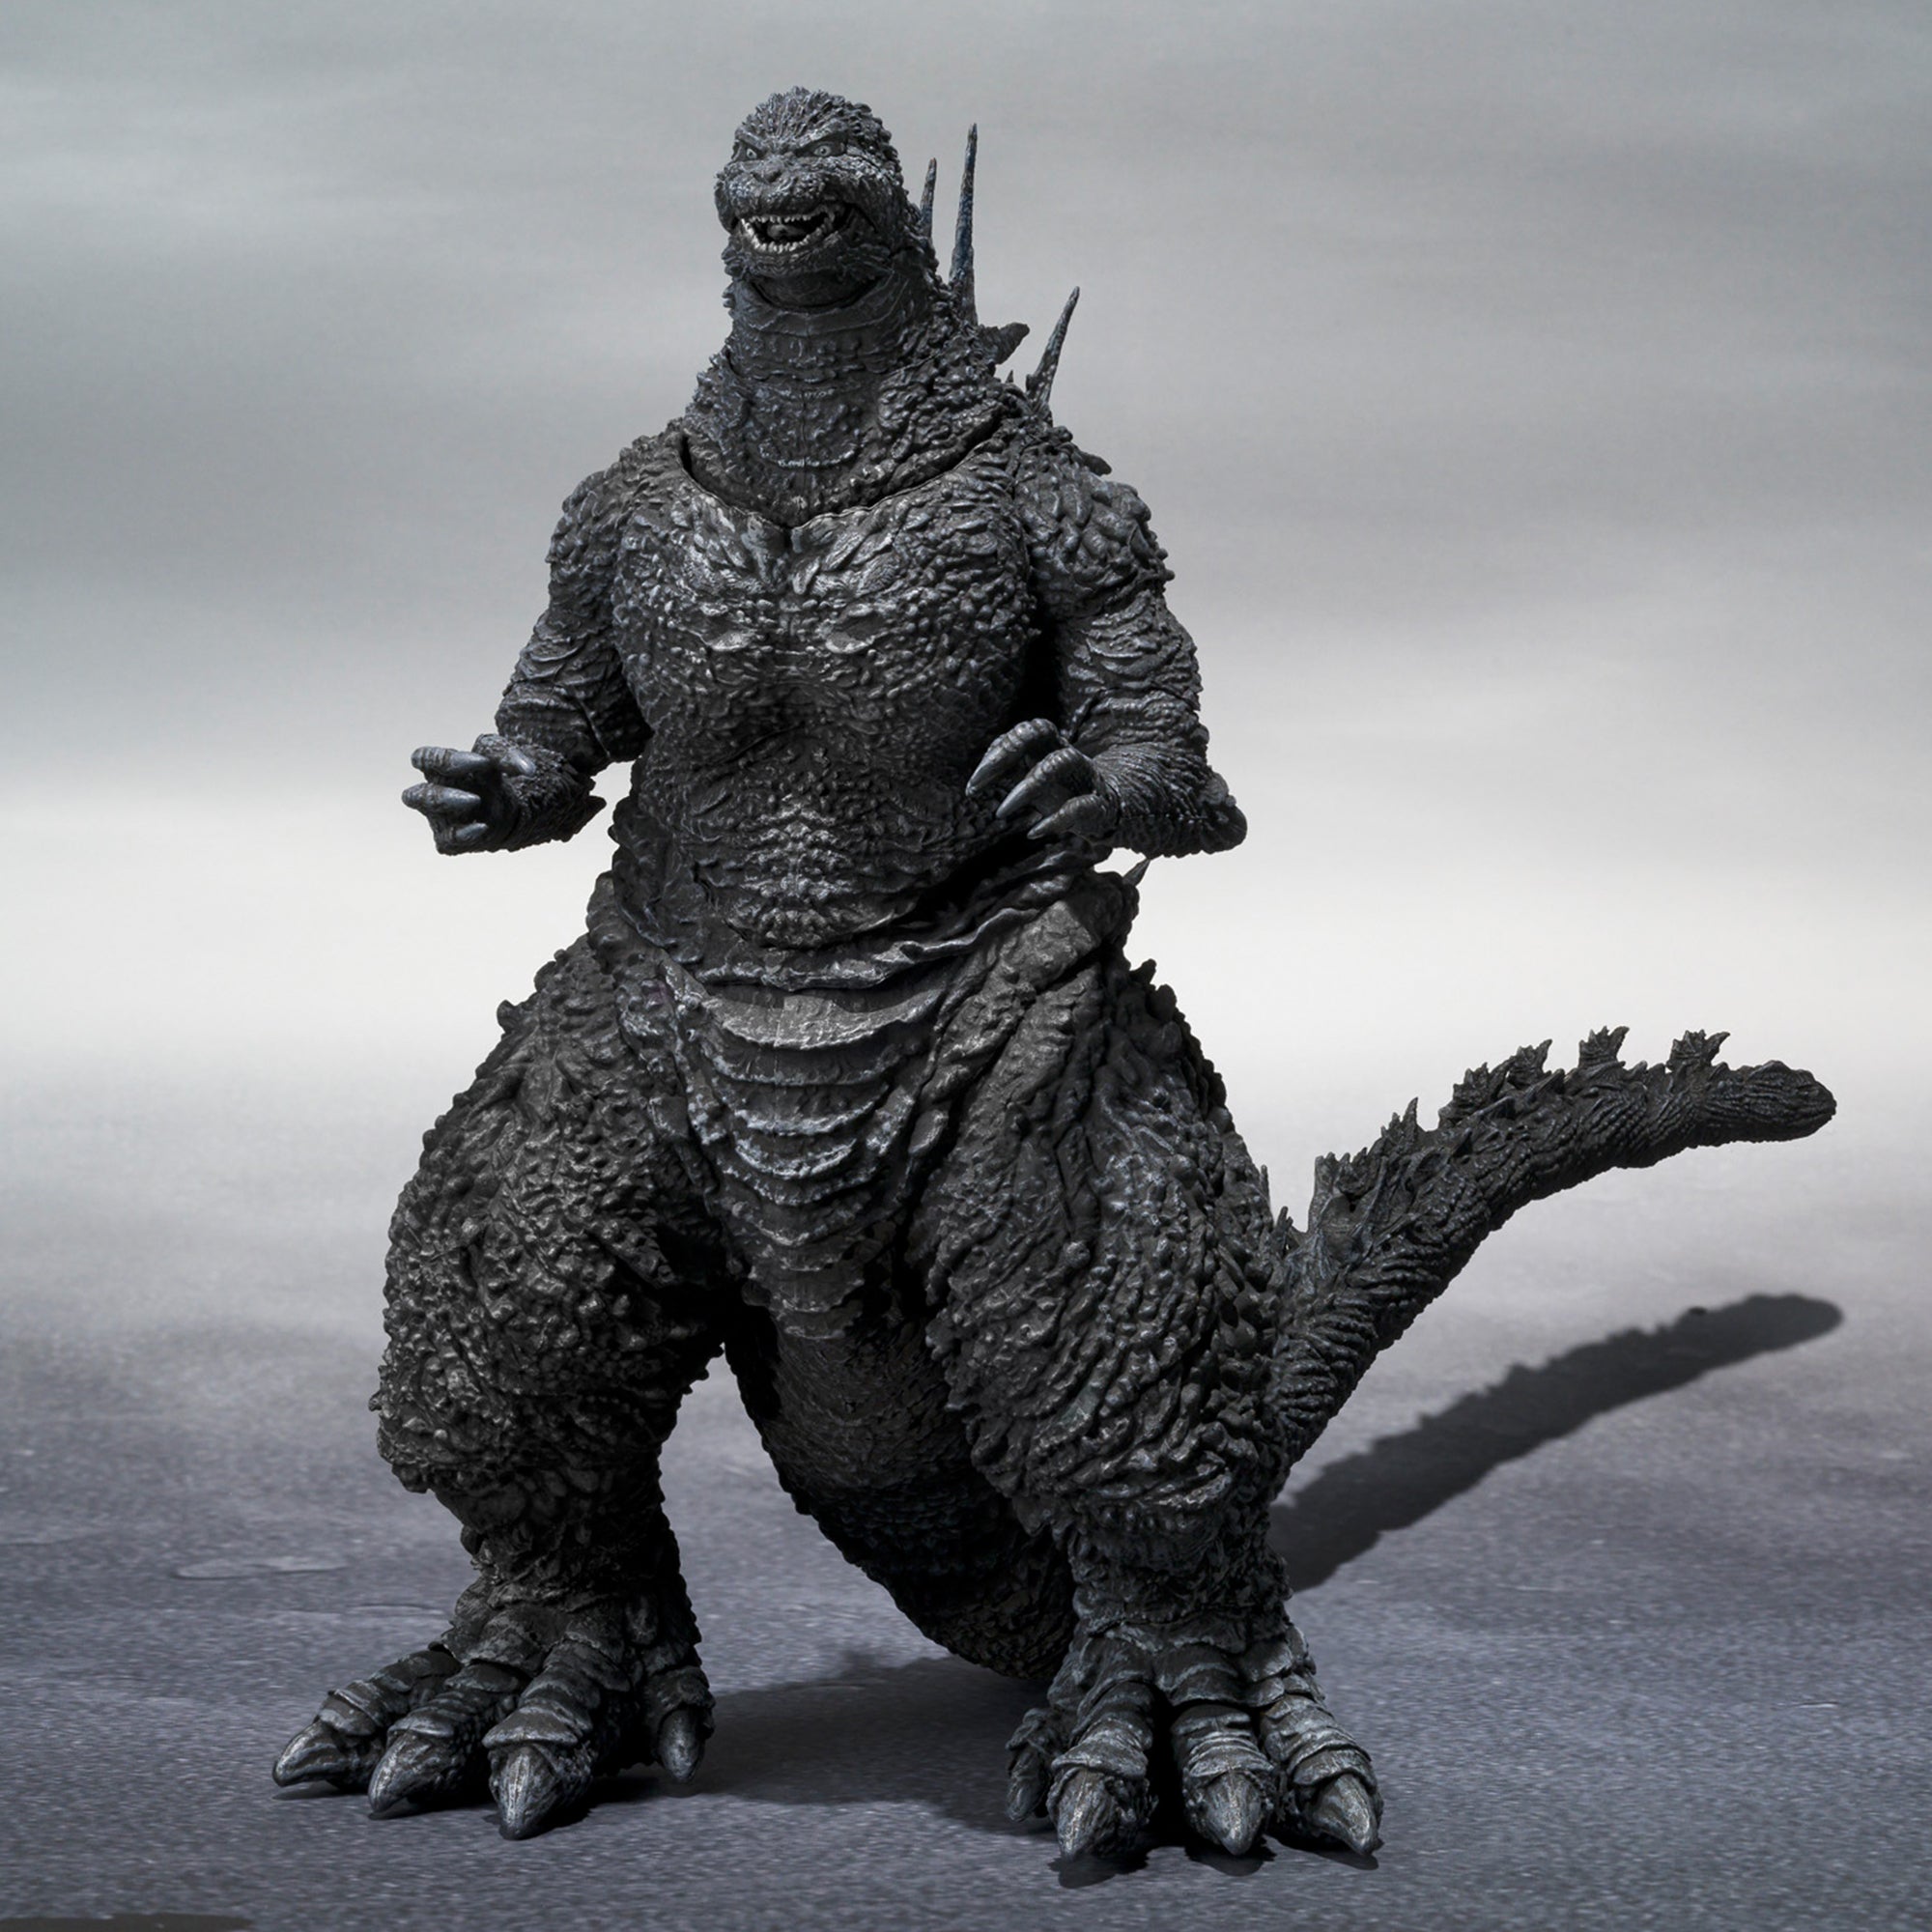 Collectibles: Figures, Statues, Plush, Toys & More | Godzilla Store